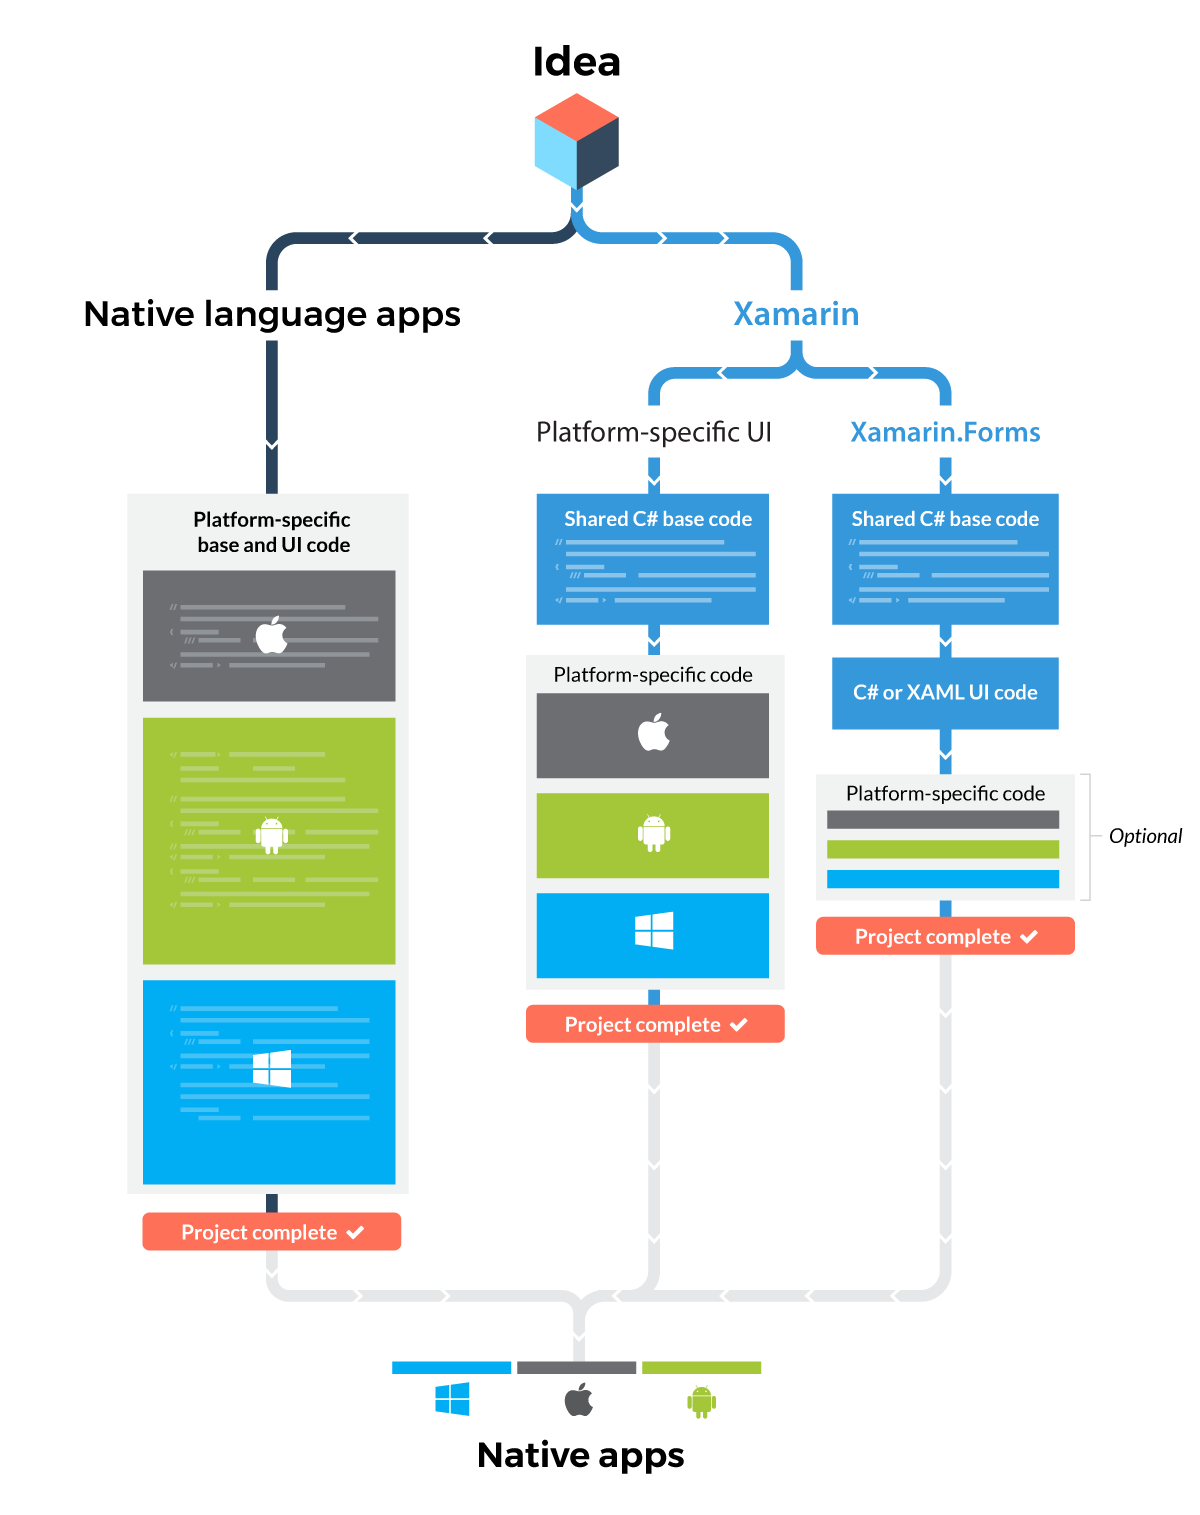 Infographic image showing how an idea turns into a native app using multiple platforms.